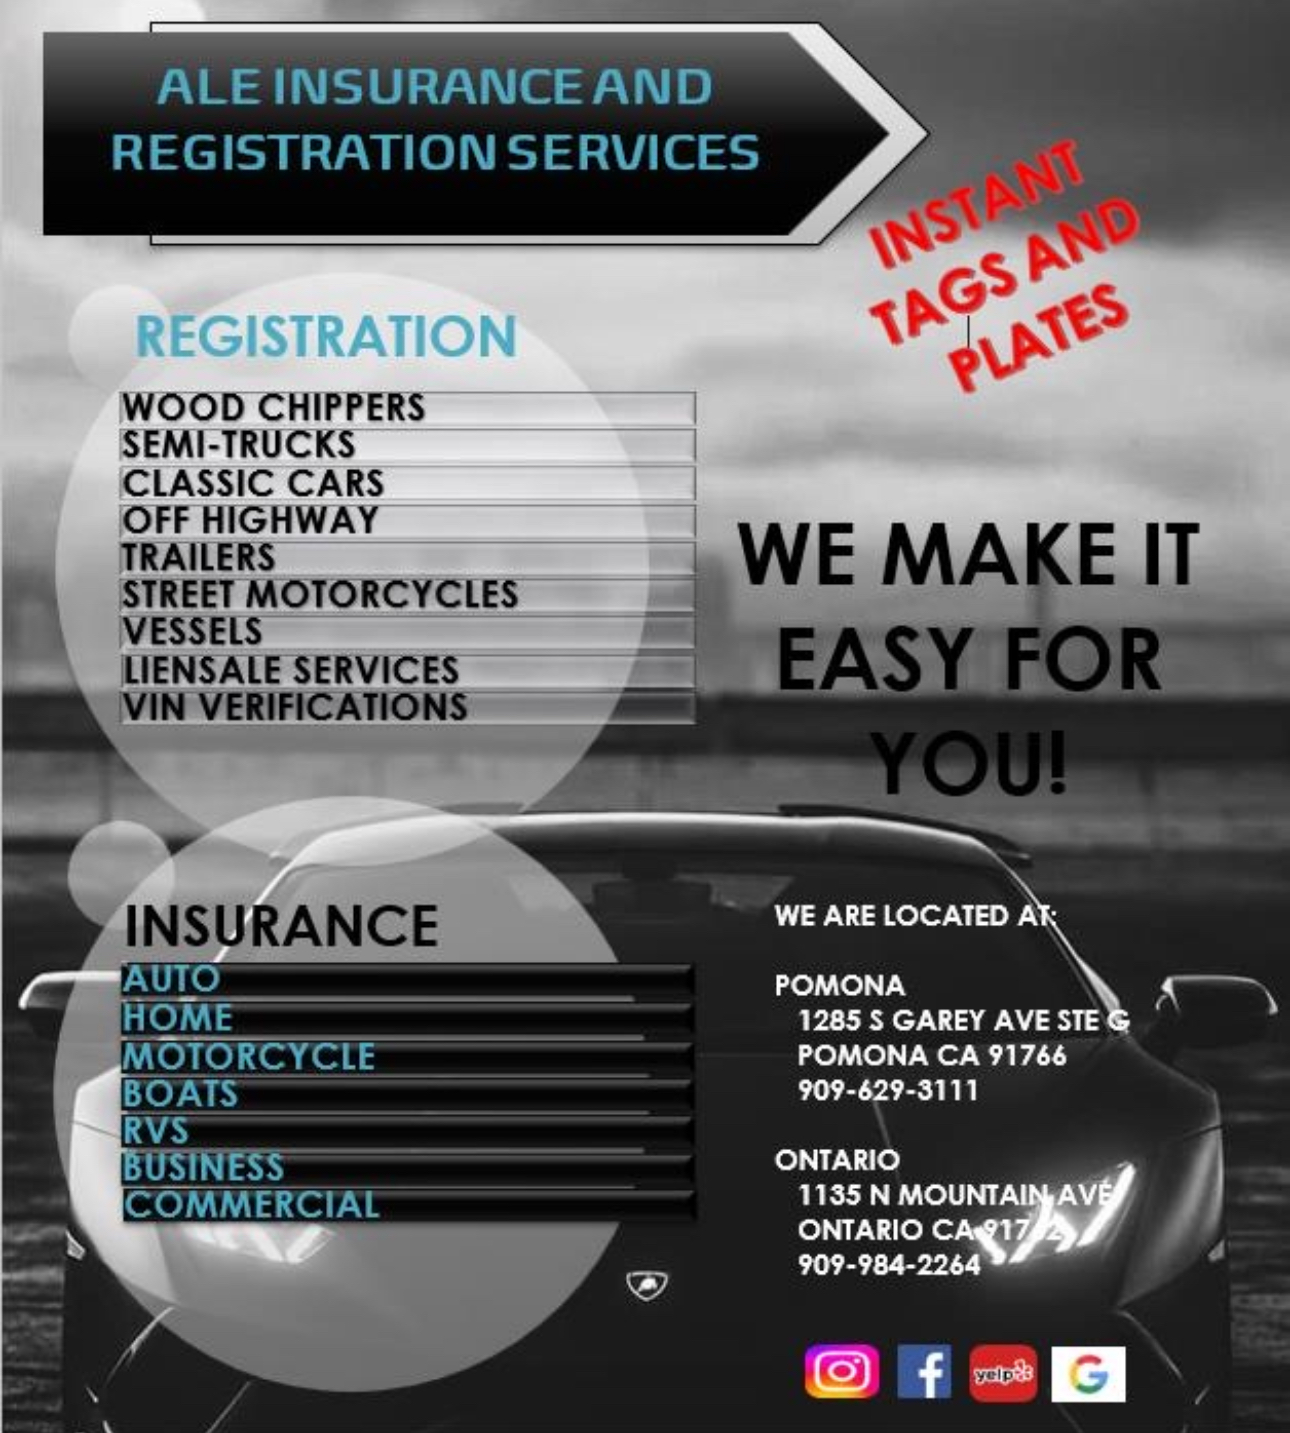 Ale Insurance, income tax & Vehicle Registration Services